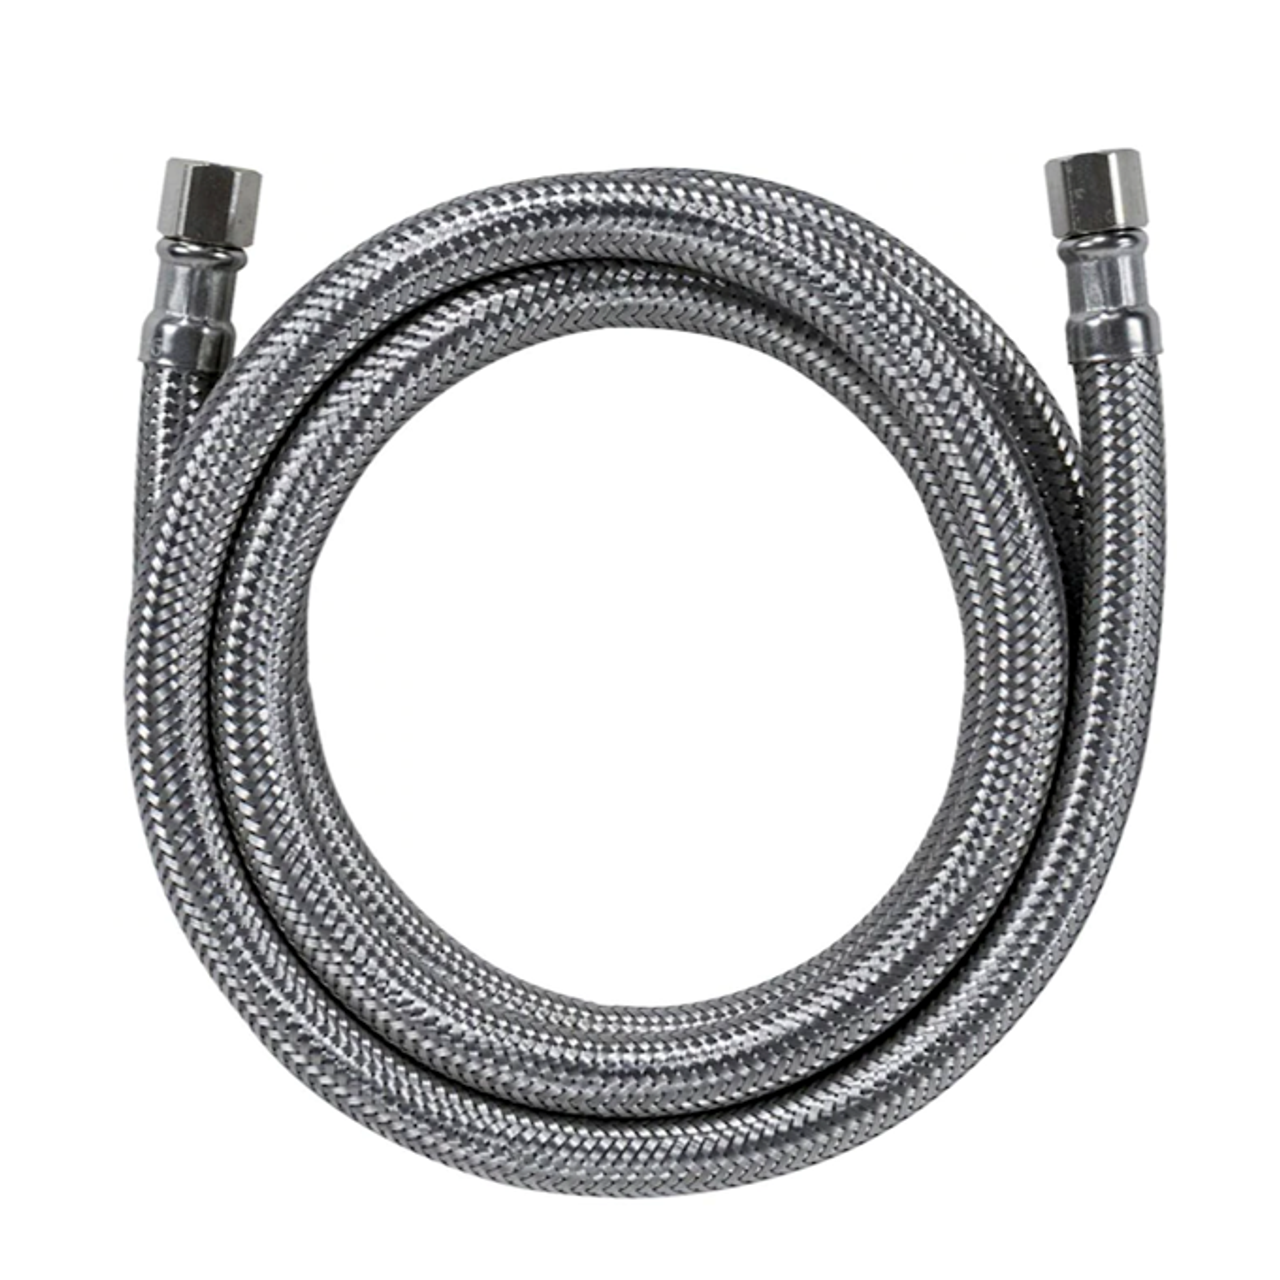 5-ft 1/4-in Compression Inlet x 1/4-in Compression Outlet Stainless Steel  Water Line Connector